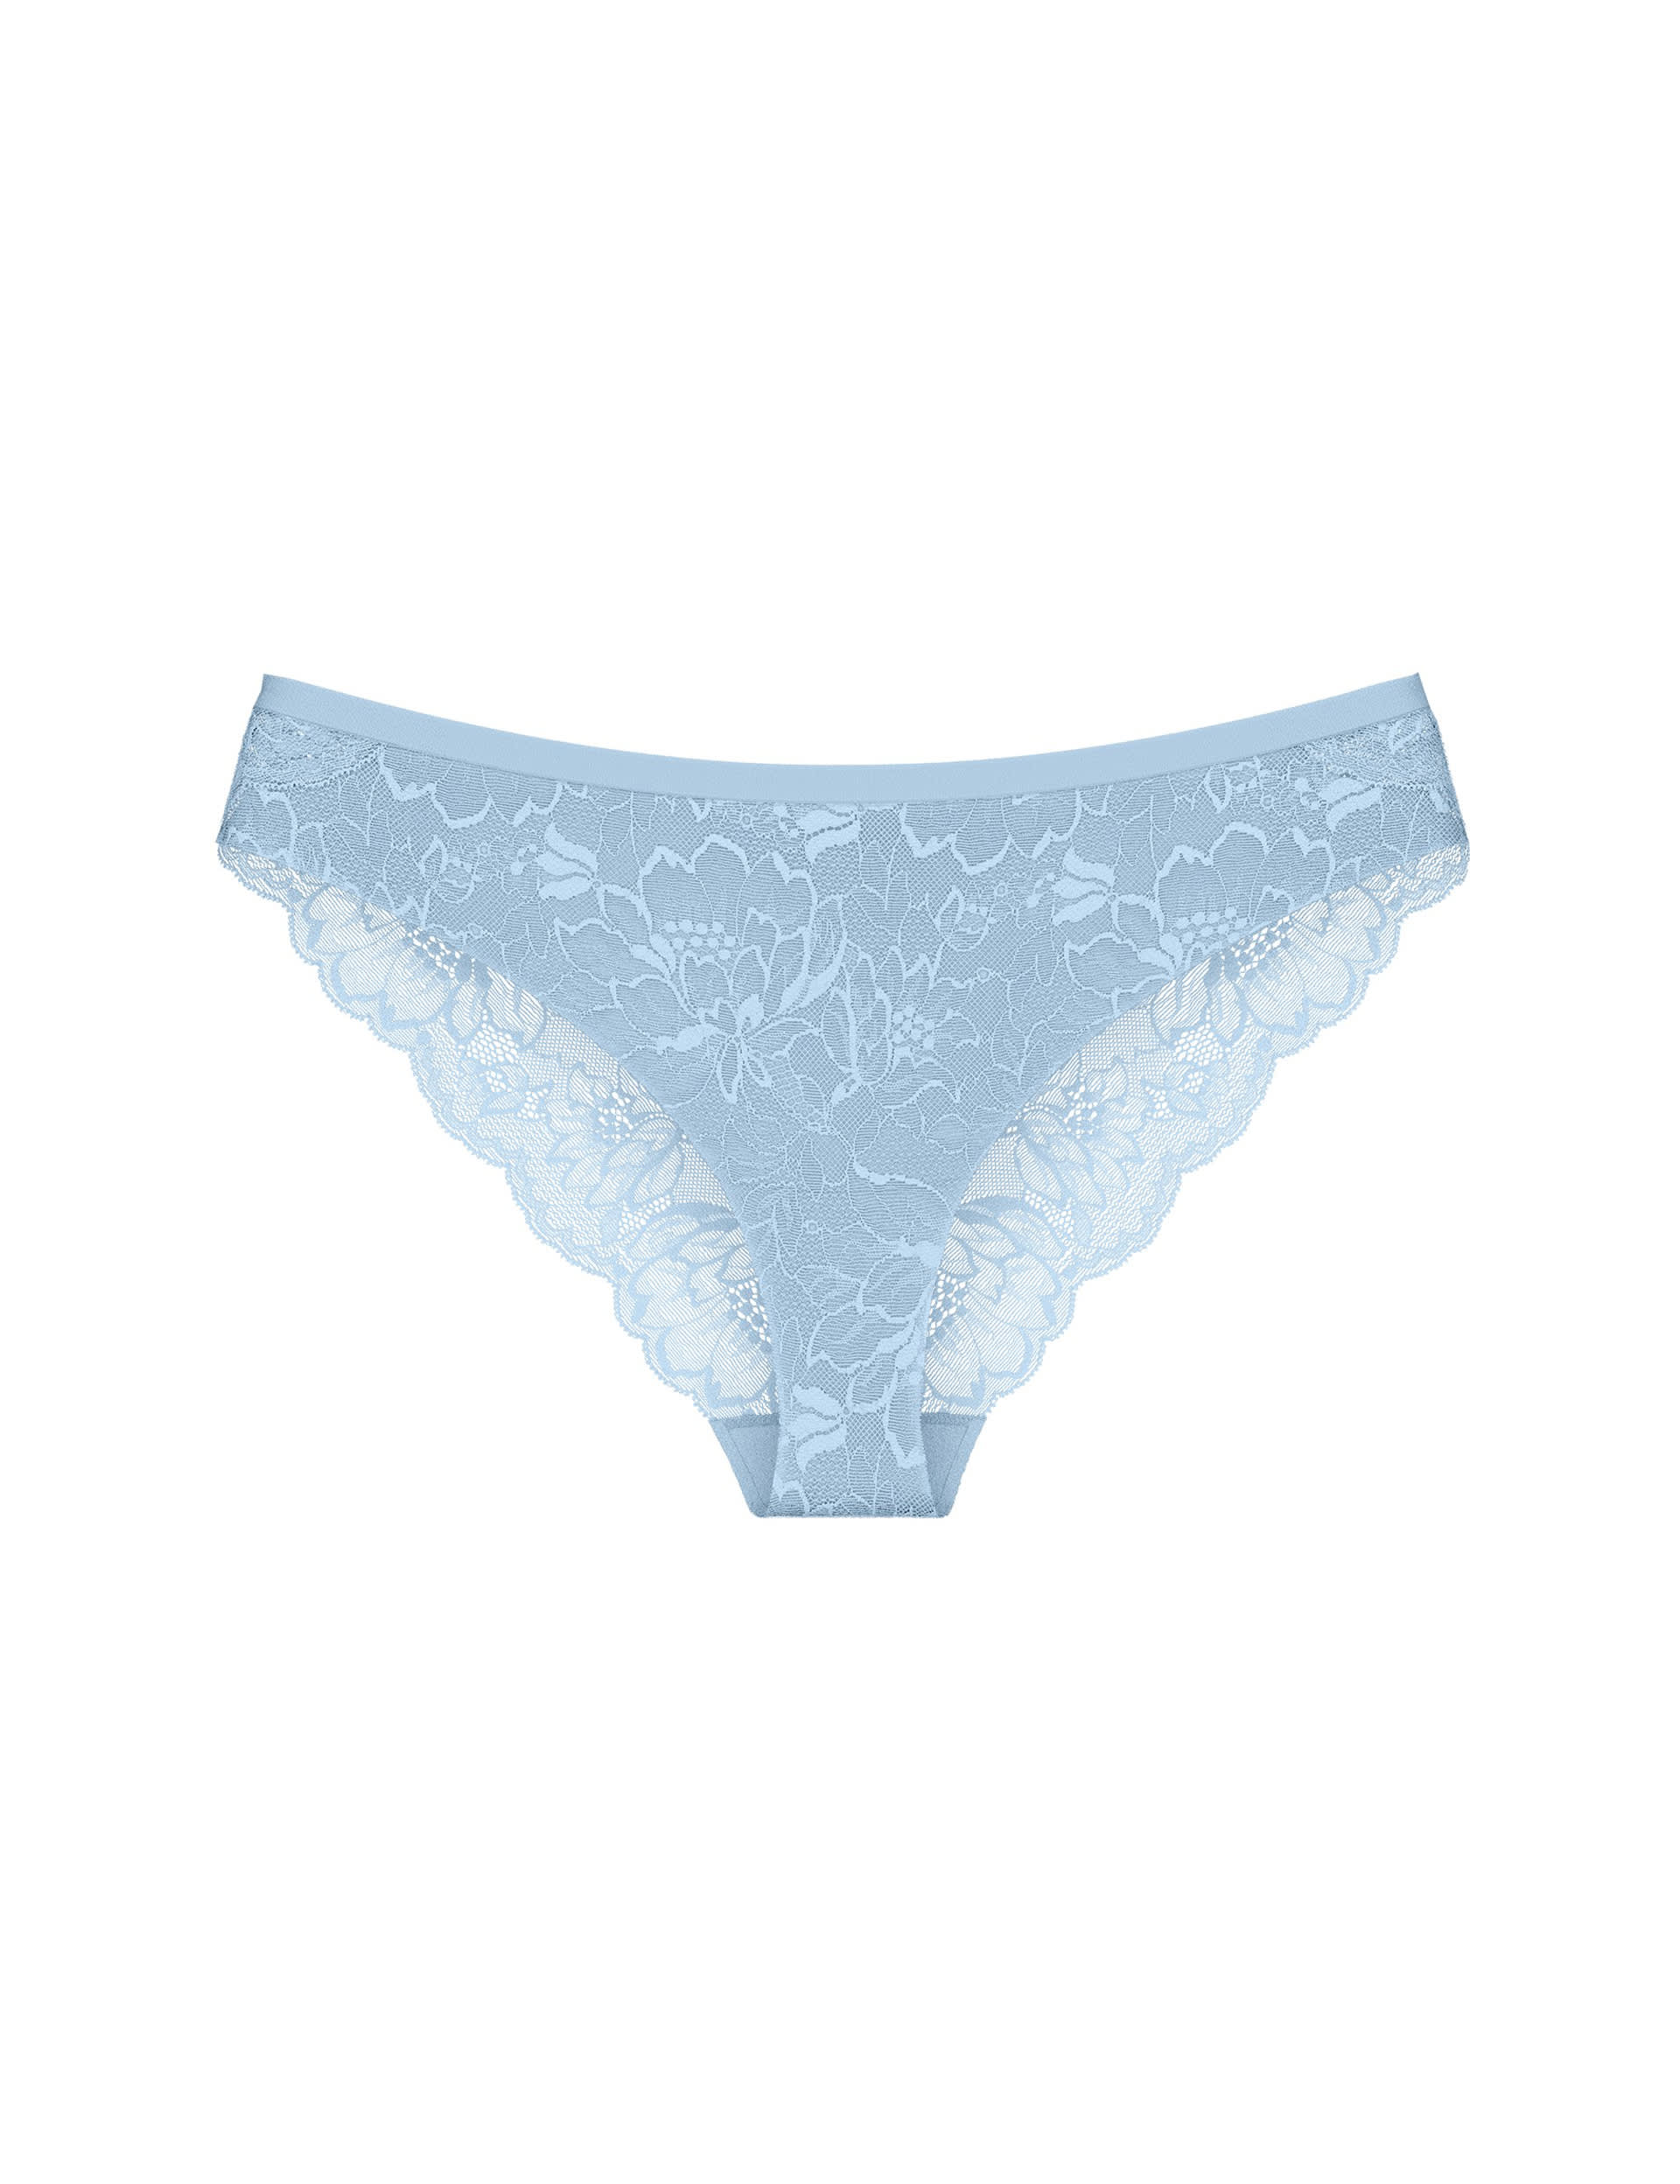 Amourette Charm All Over Lace Brazilian Knickers